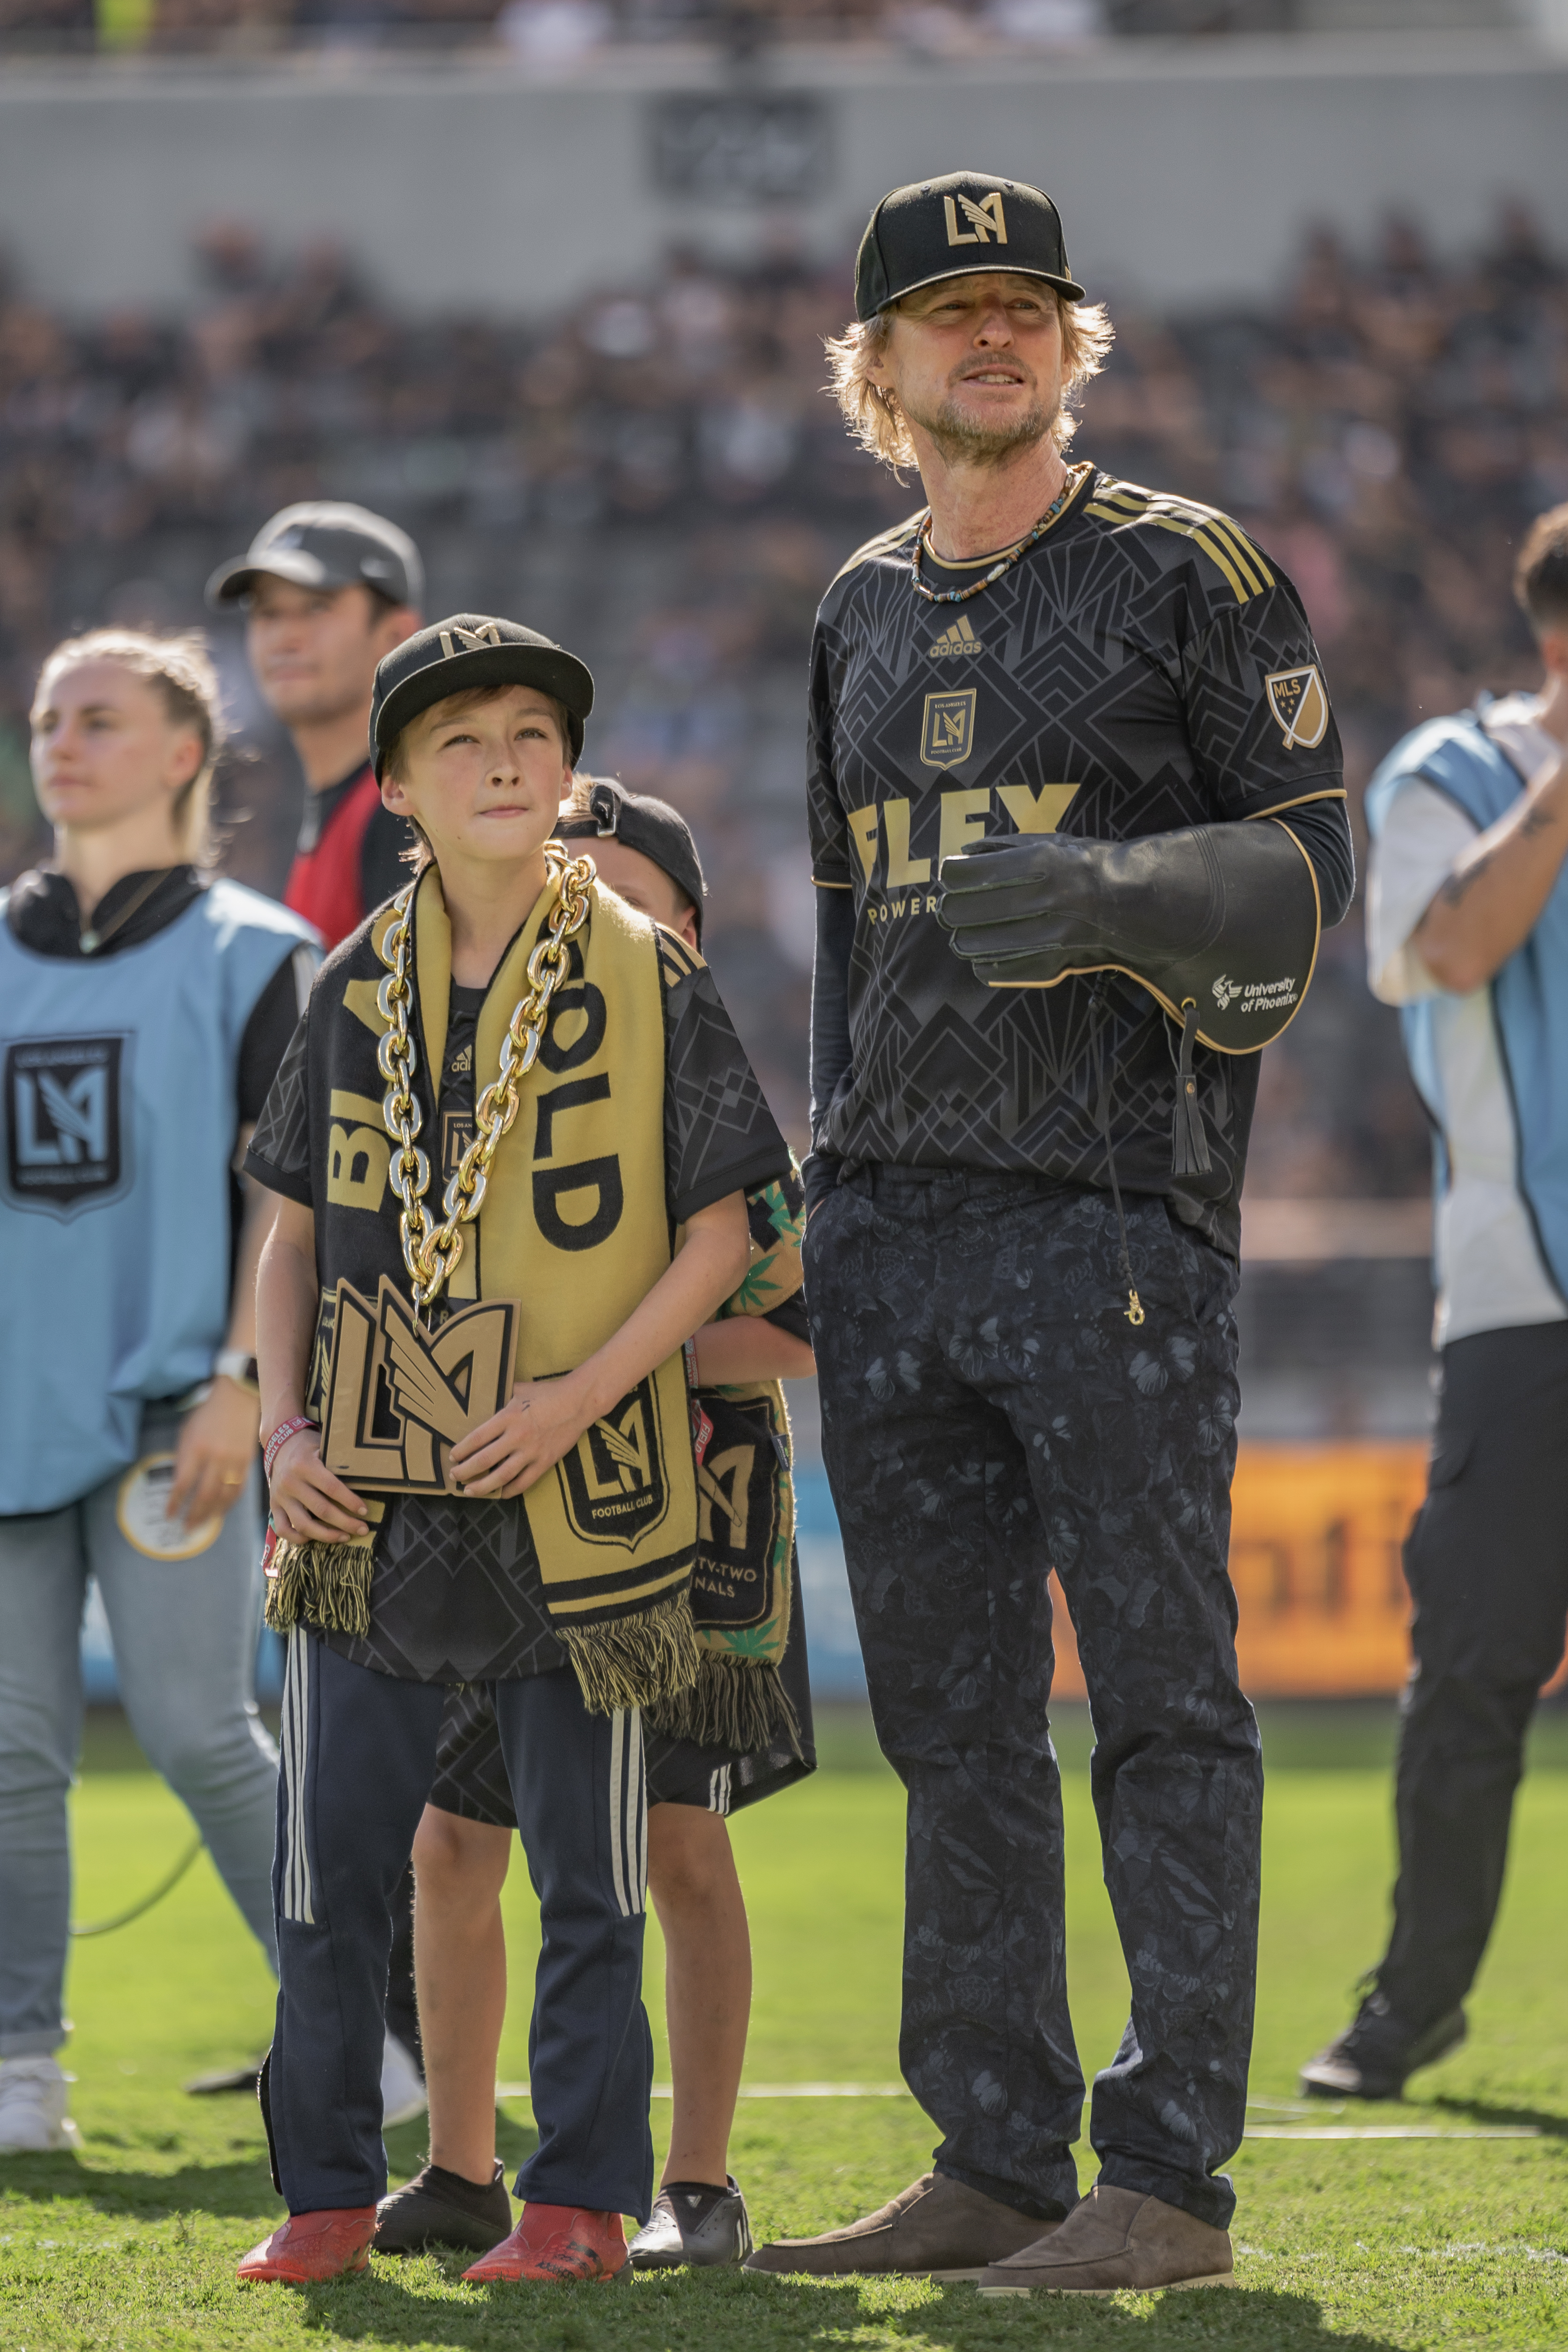 Owen Wilson and his son at Banc of California Stadium on October 29, 2022, in Los Angeles, California | Source: Getty Images